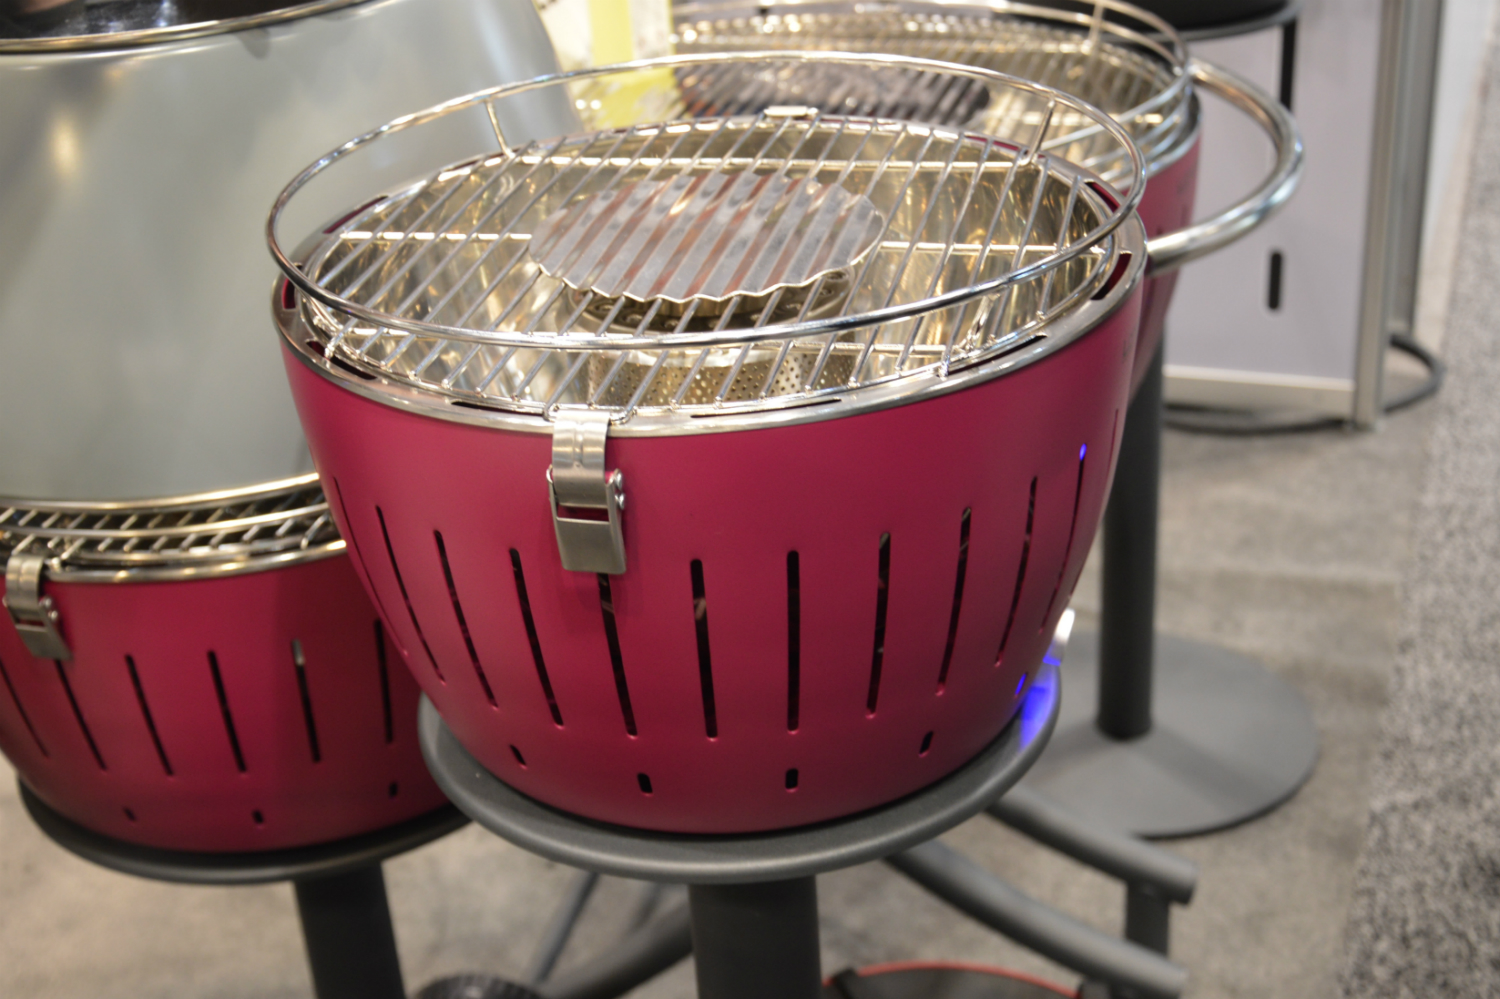 The LotusGrill Is a Nearly Smokeless Charcoal Grill